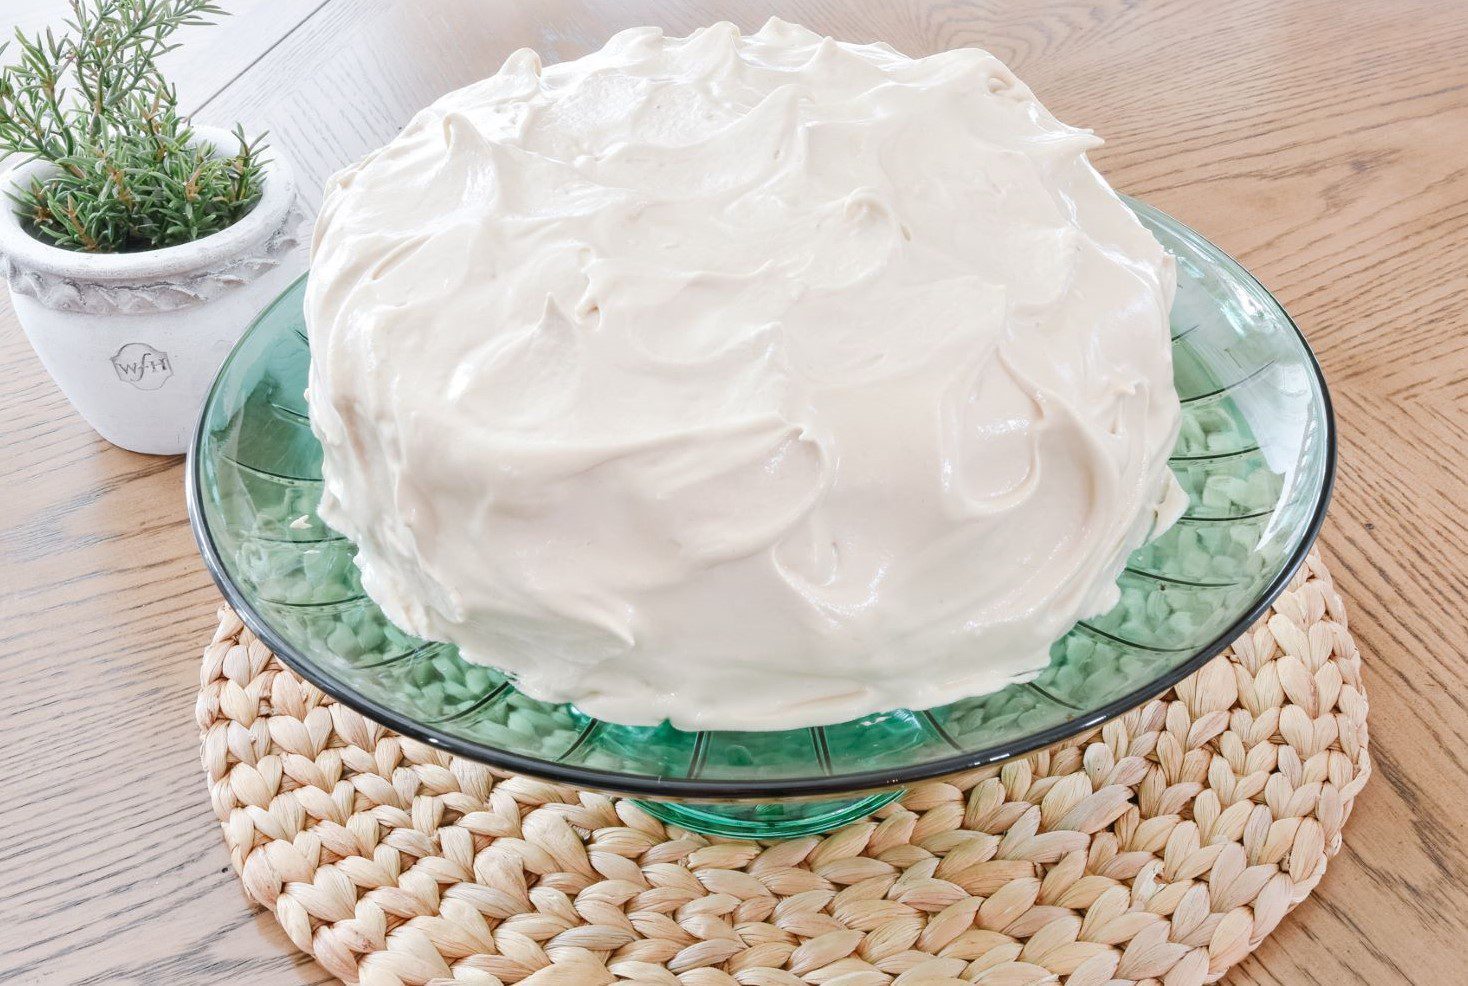 Nan’s Double Boiled Icing: A Timeless Classic